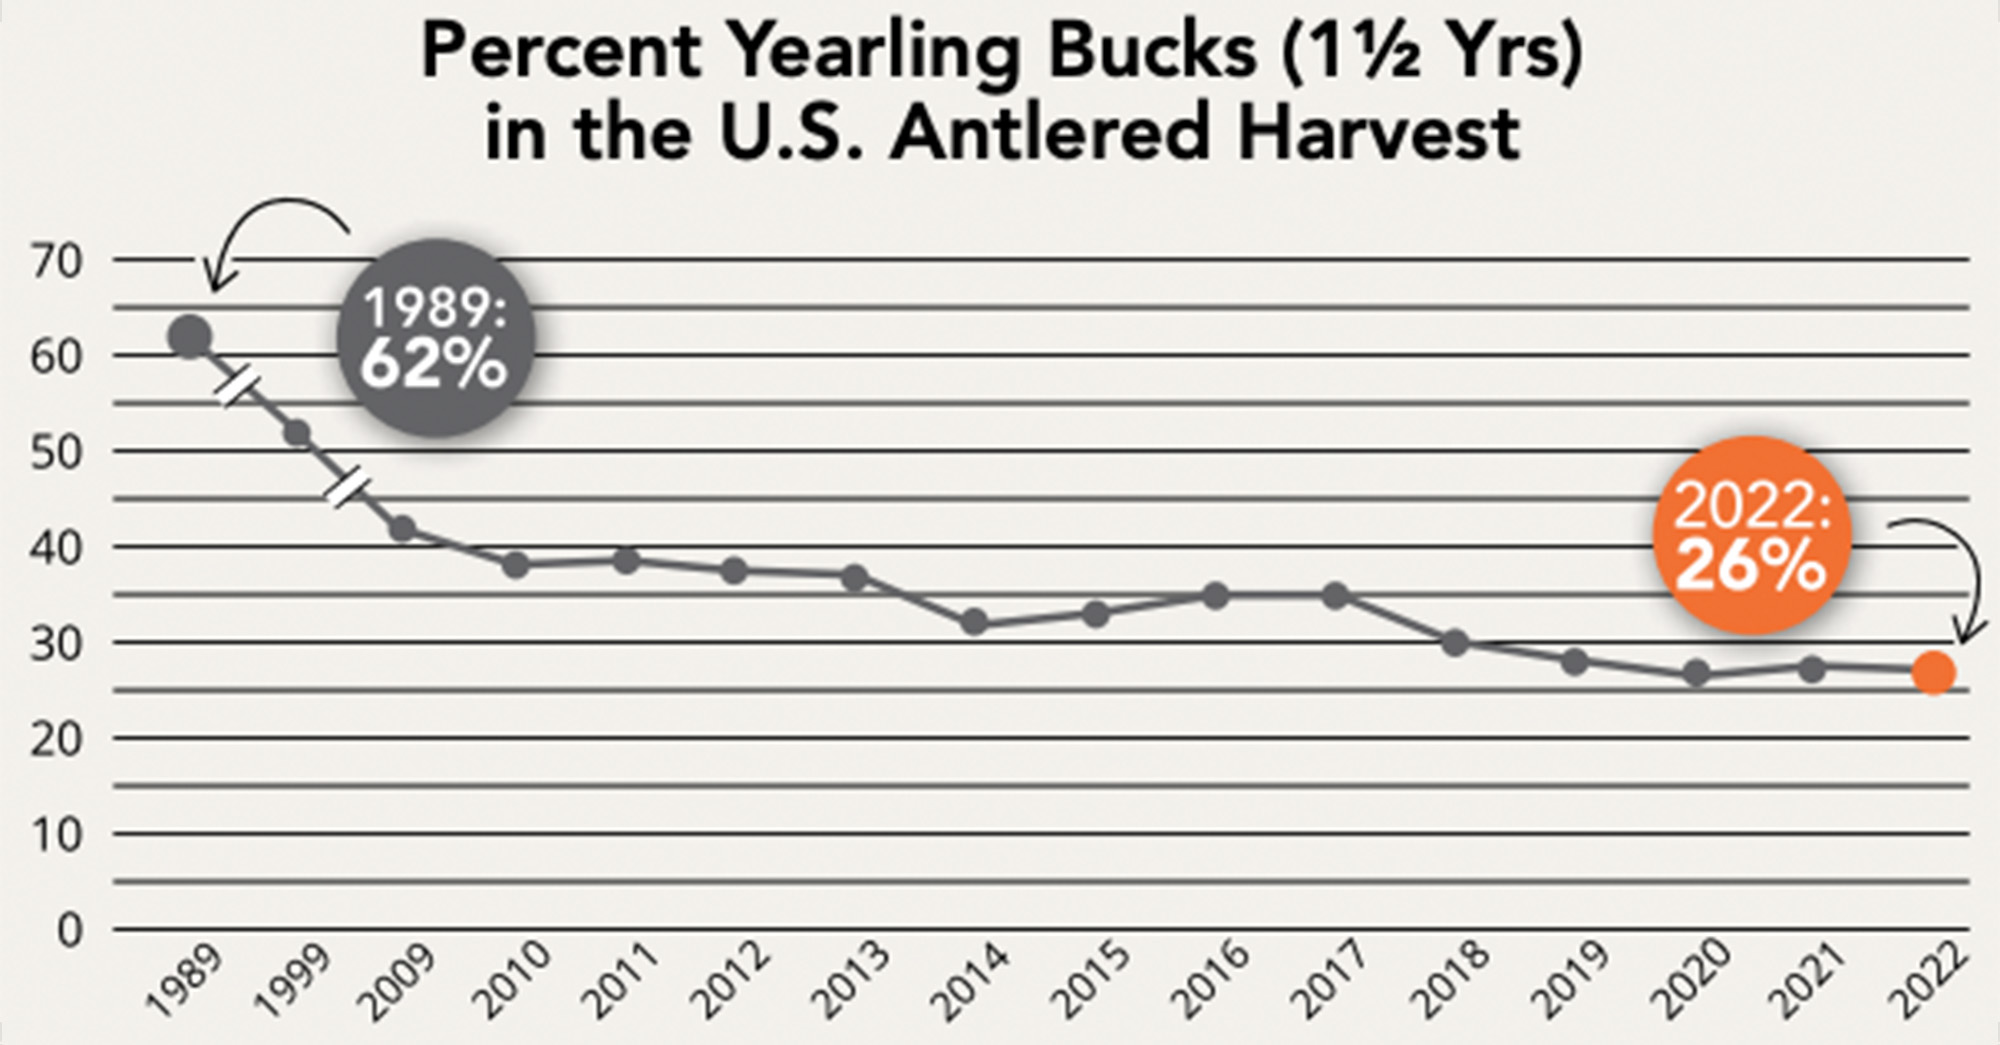 A graph showing the percentage of yearling bucks harvested in the U.S. between 1989 and 2022.